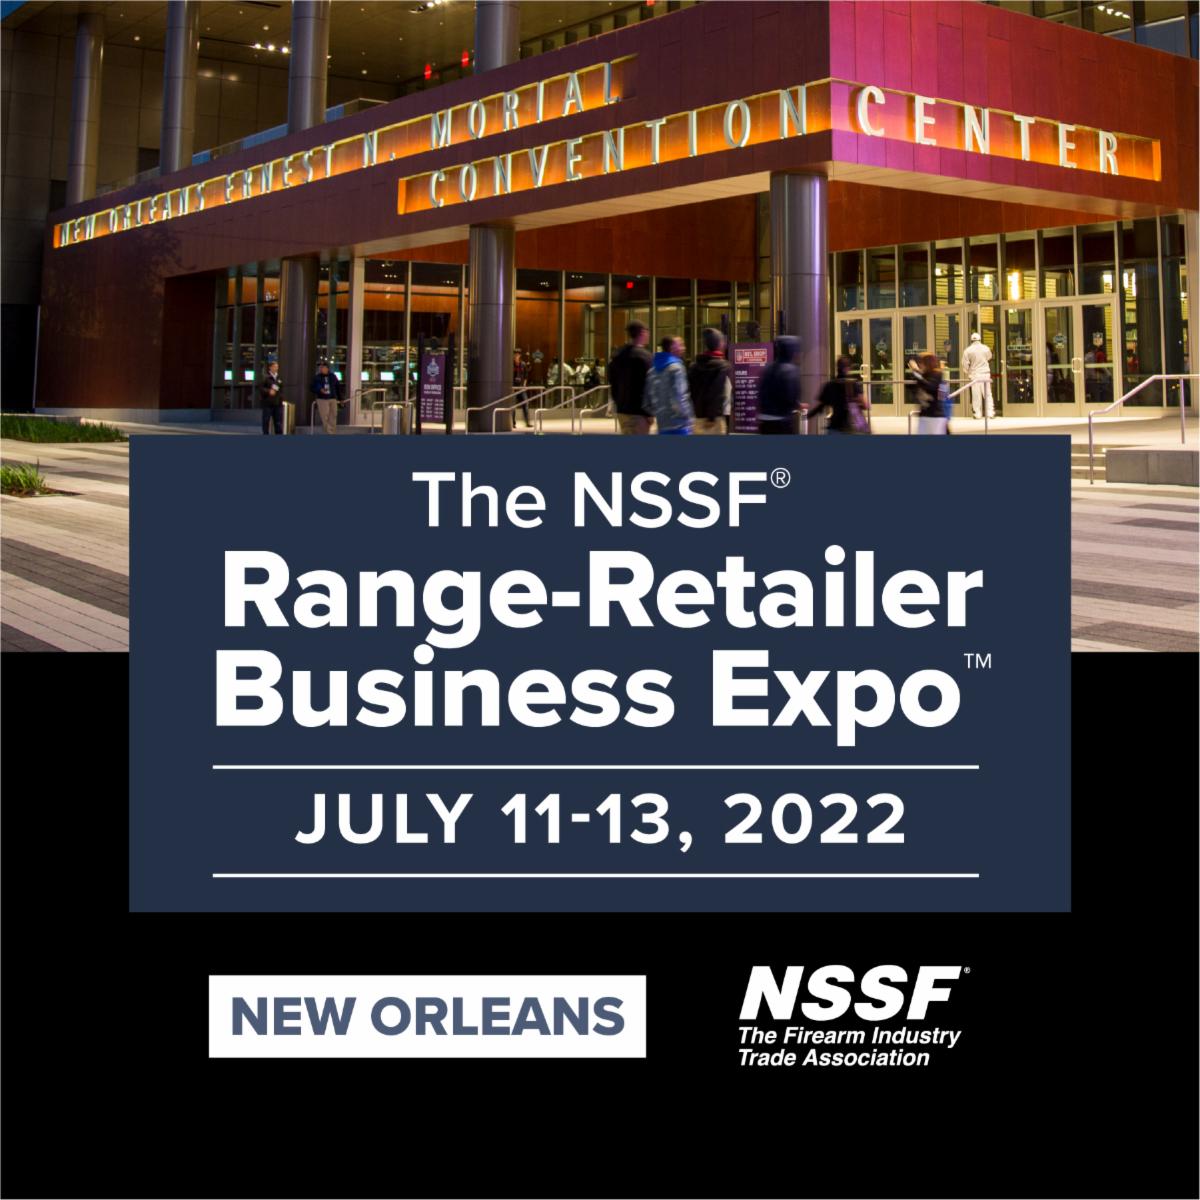 Registration for Attendees and Exhibitors Opens for NSSF RangeRetailer